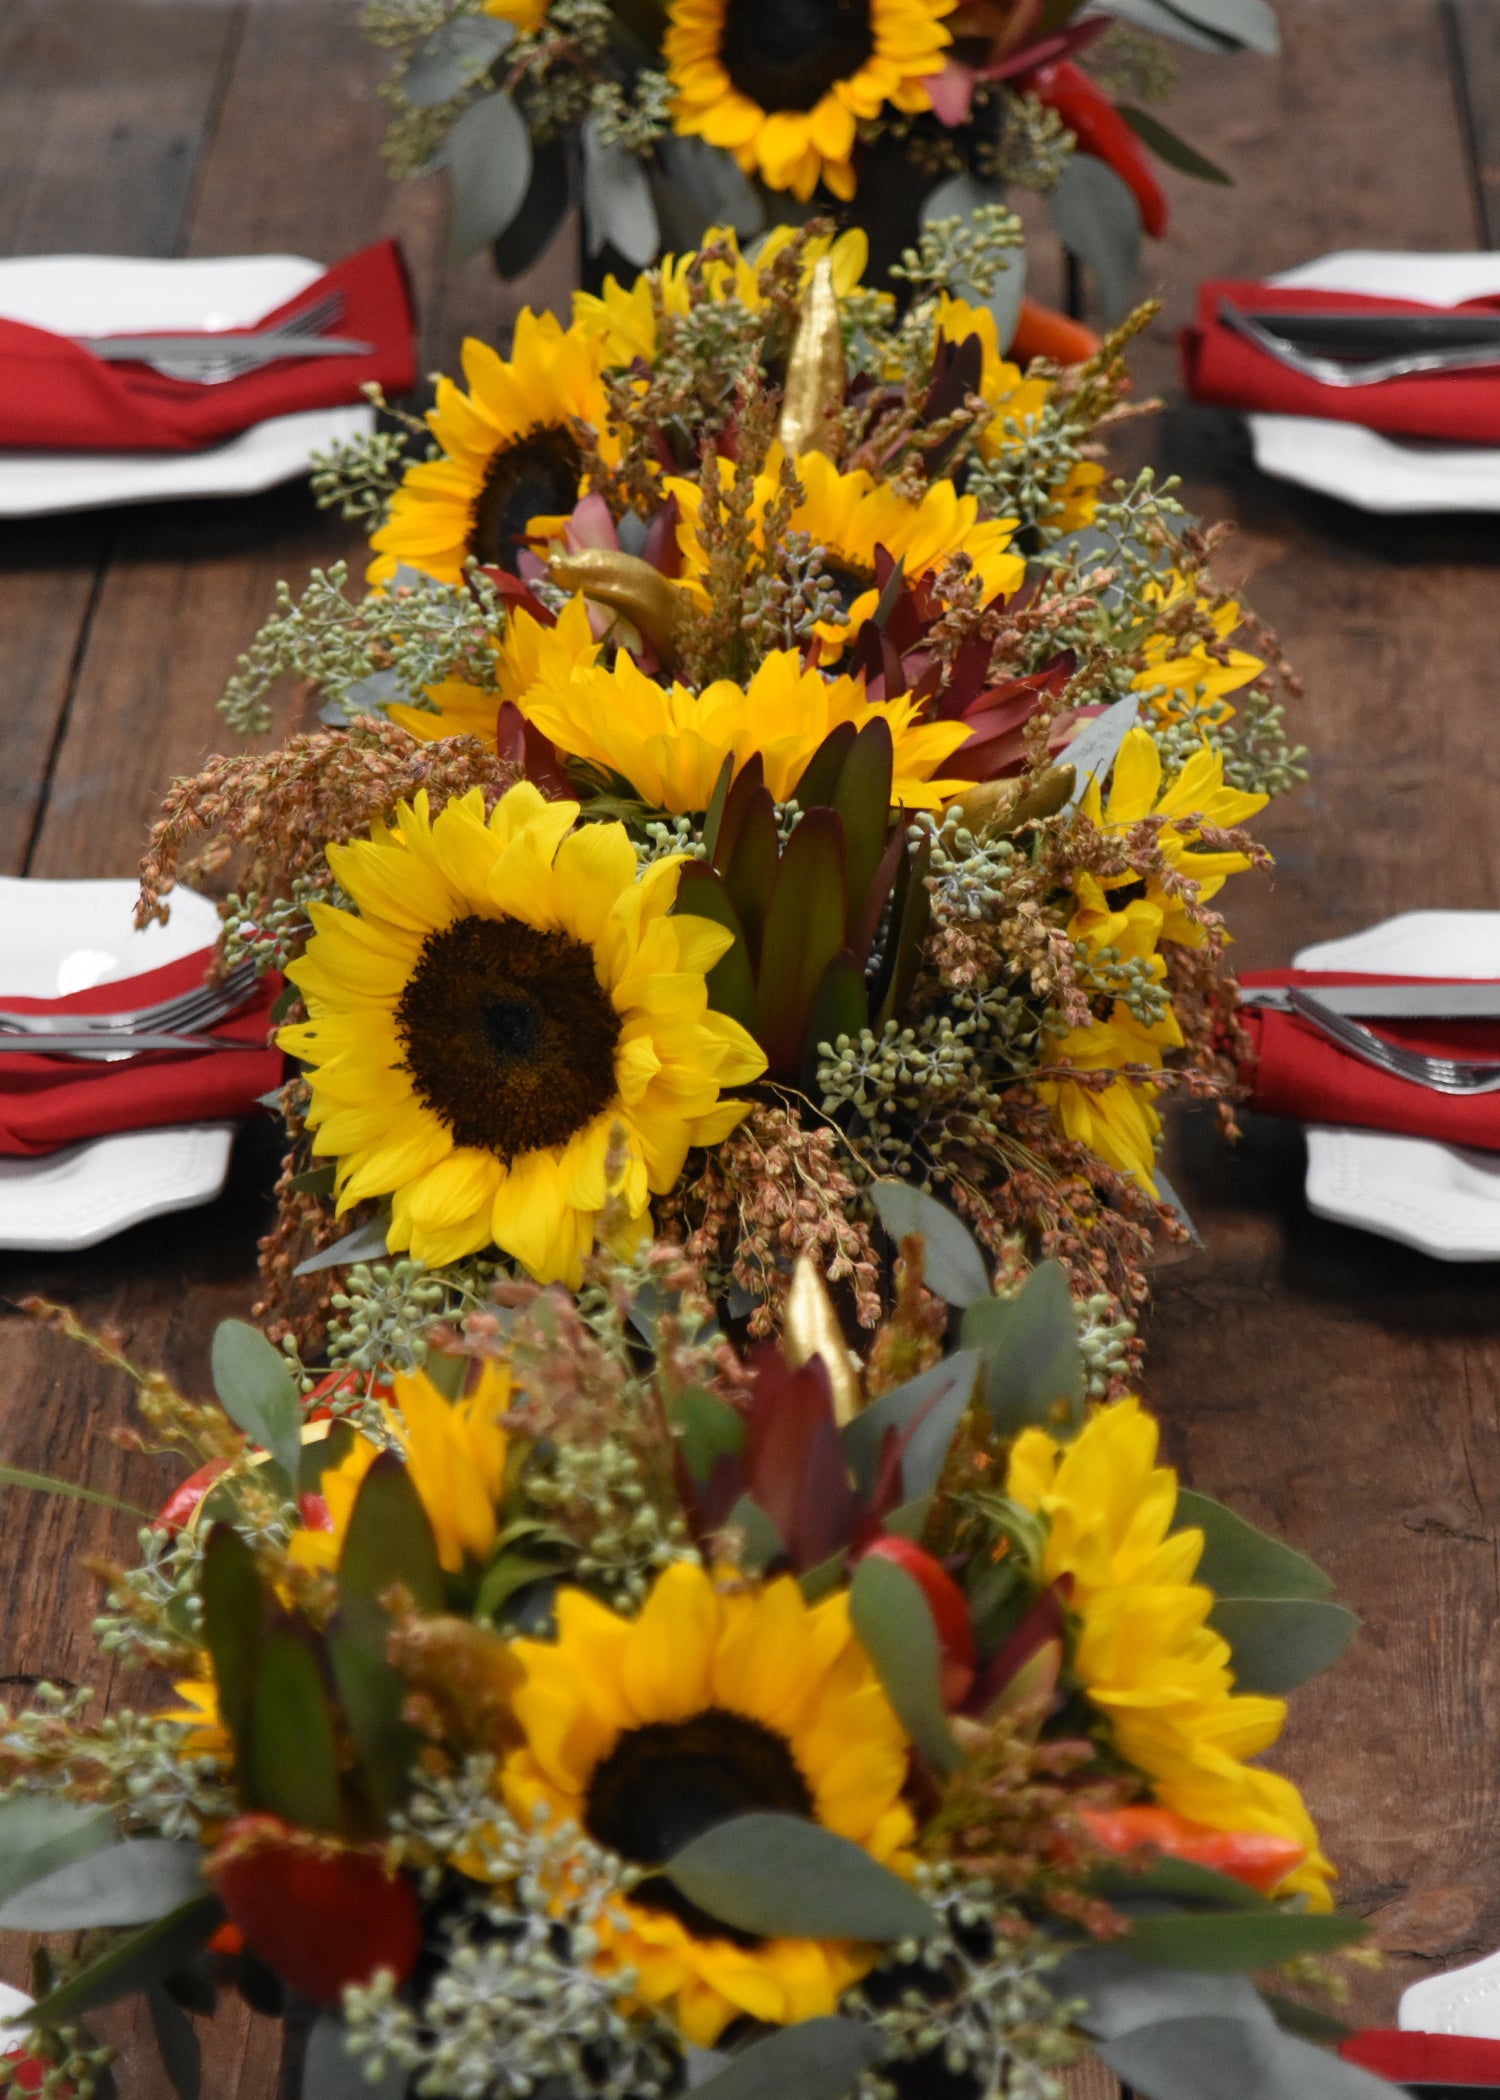 yellow sunflower arrangement table centerpiece with greenery